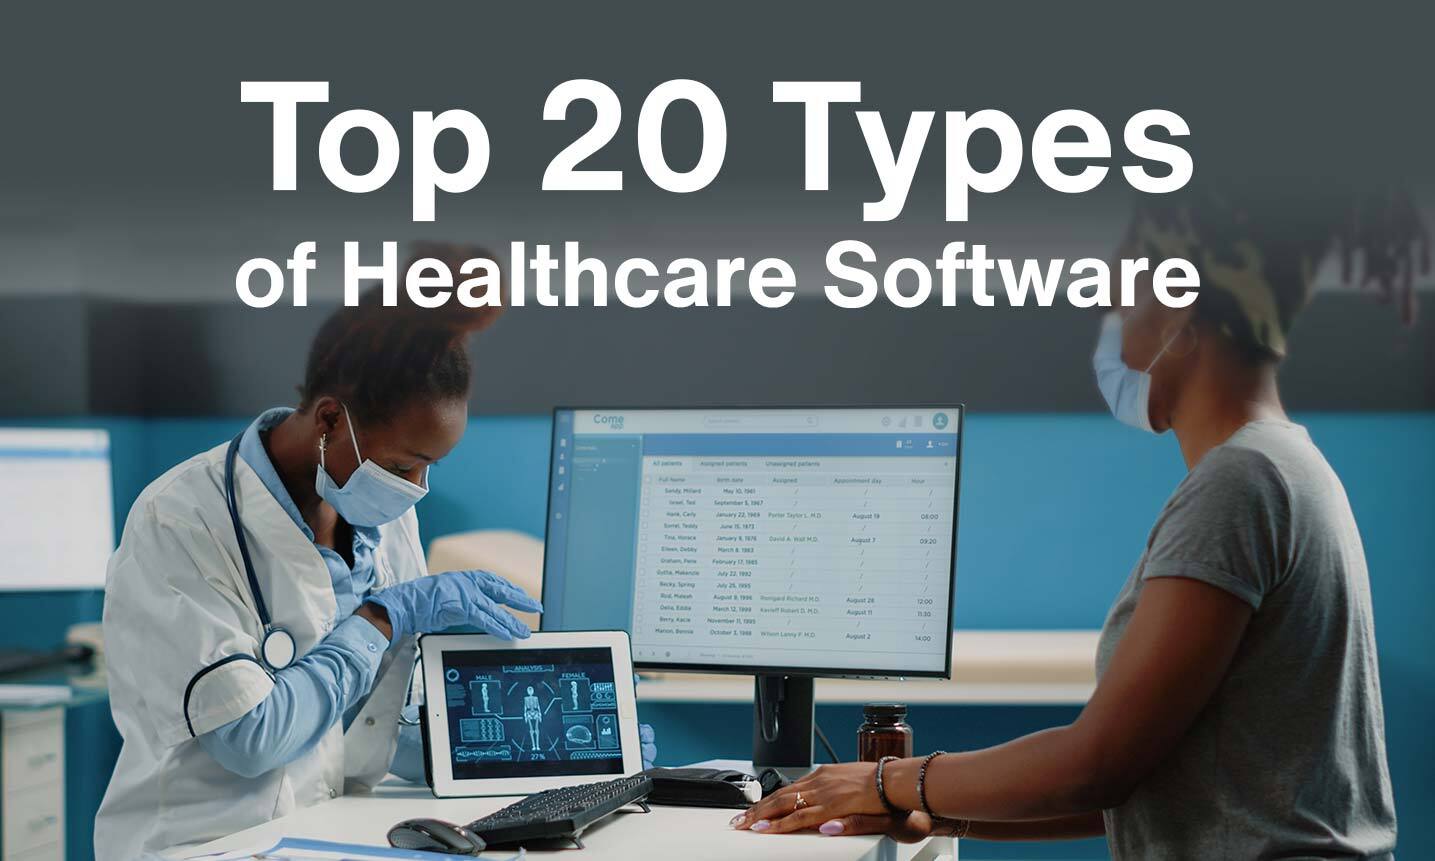 Top 20 Types of Healthcare Software